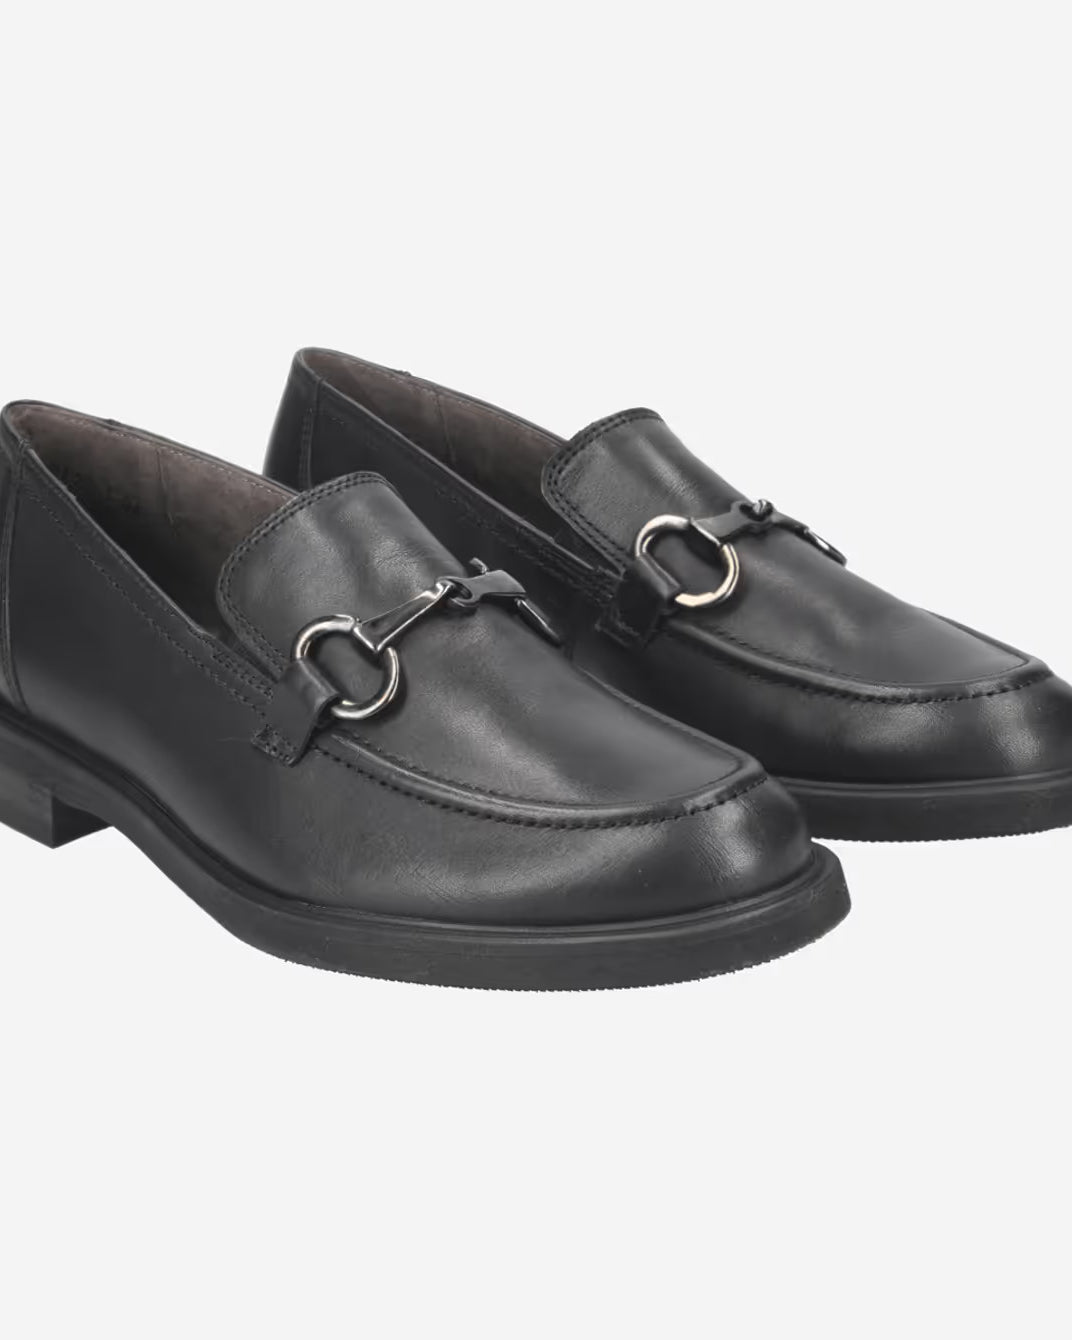 Paul Green Black Leather Buckle Loafers